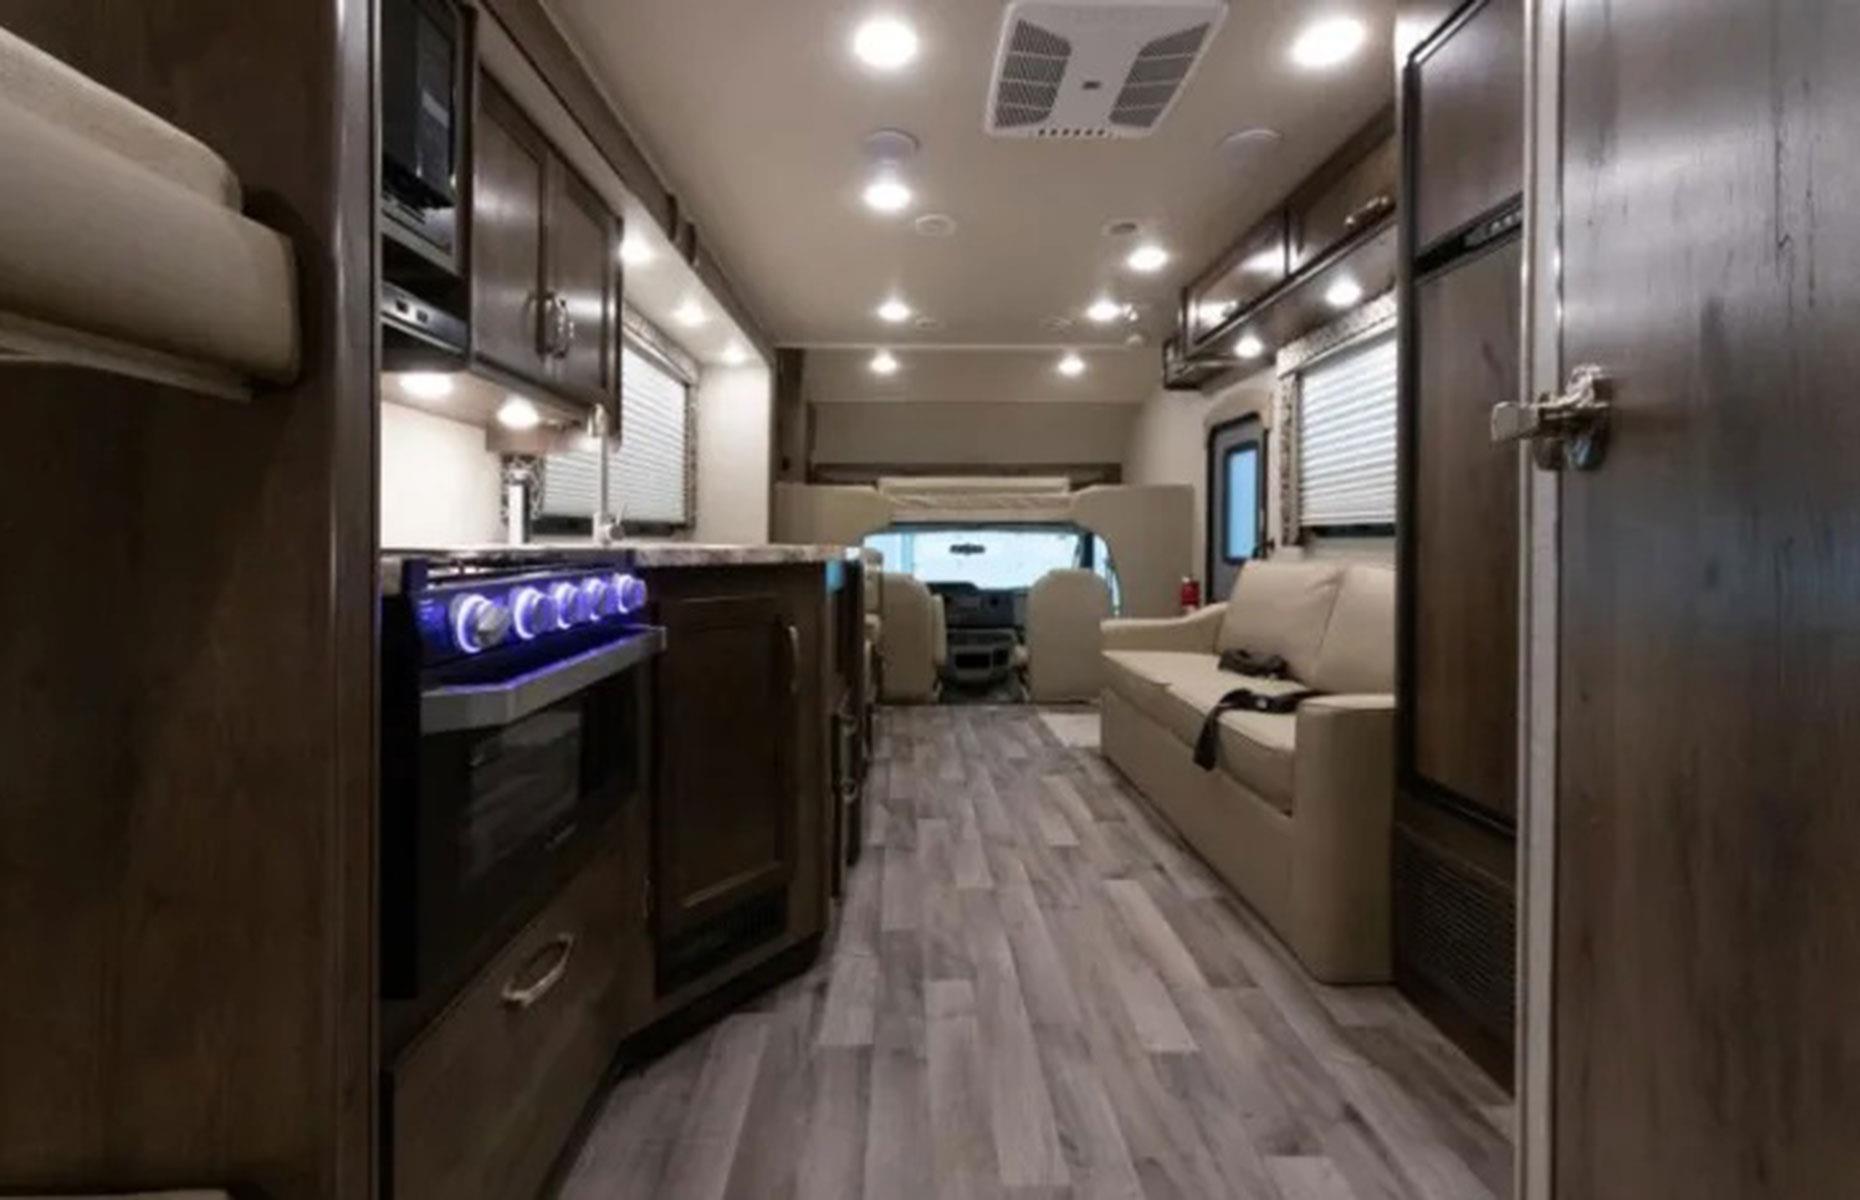 Onboard, the kitchen includes a stove, microwave, sink and refrigerator as well as pots, pans and utensils for cooking. There’s also a three-burner cooktop and double sink to make use of. Its interior includes Hudson maple cabinetry, oil-rubbed bronze hardware and vinyl flooring.